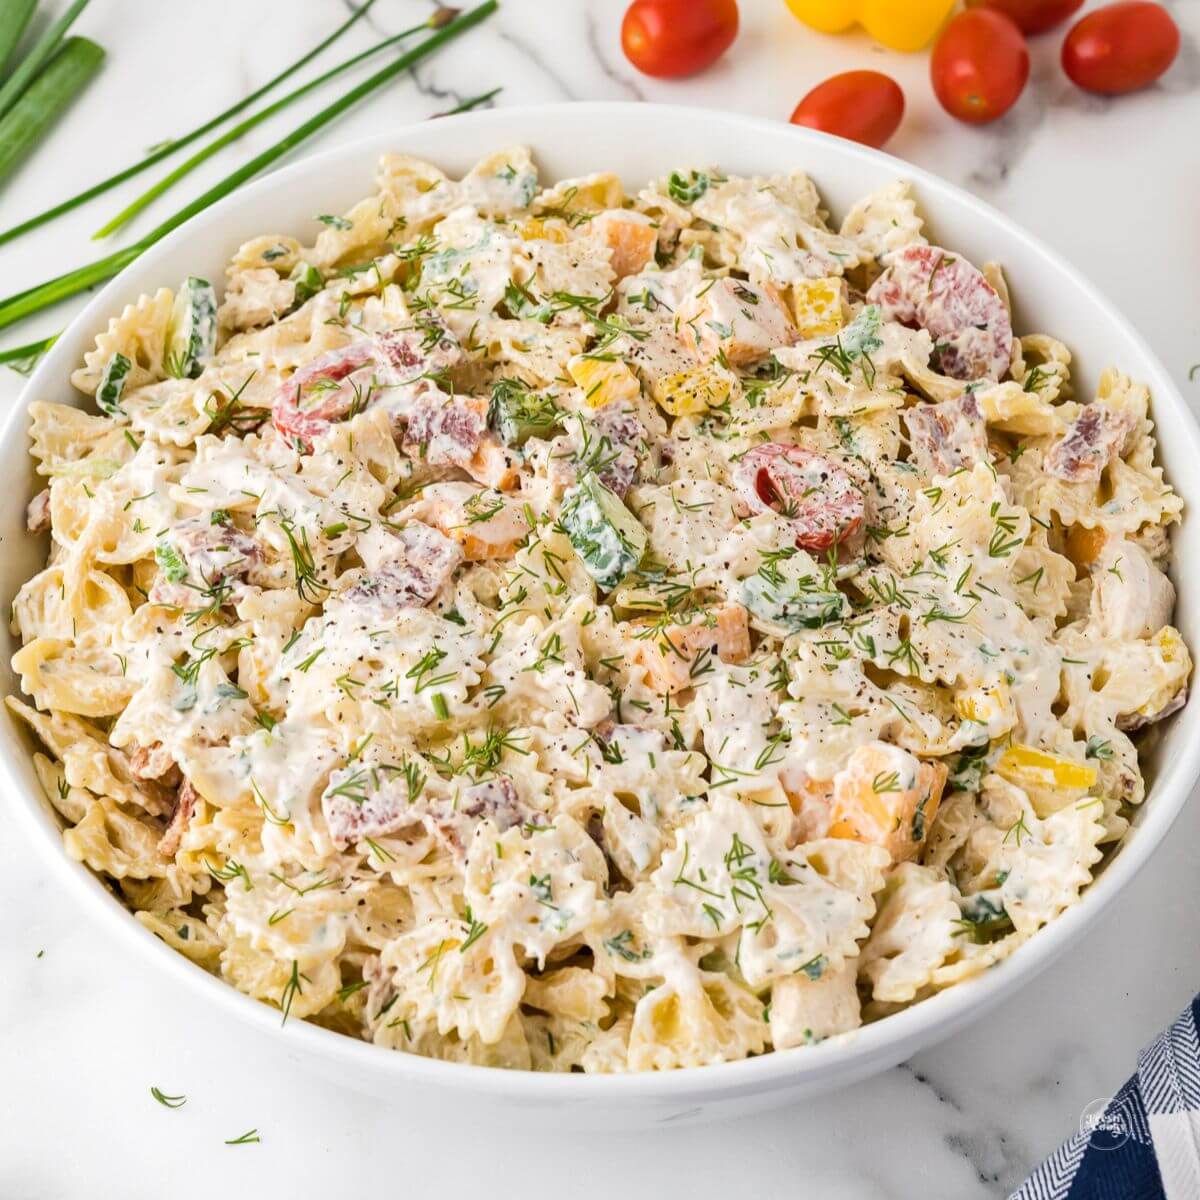 Chicken bacon ranch pasta salad in a large white bowl with fresh tomatoes and herbs behind.